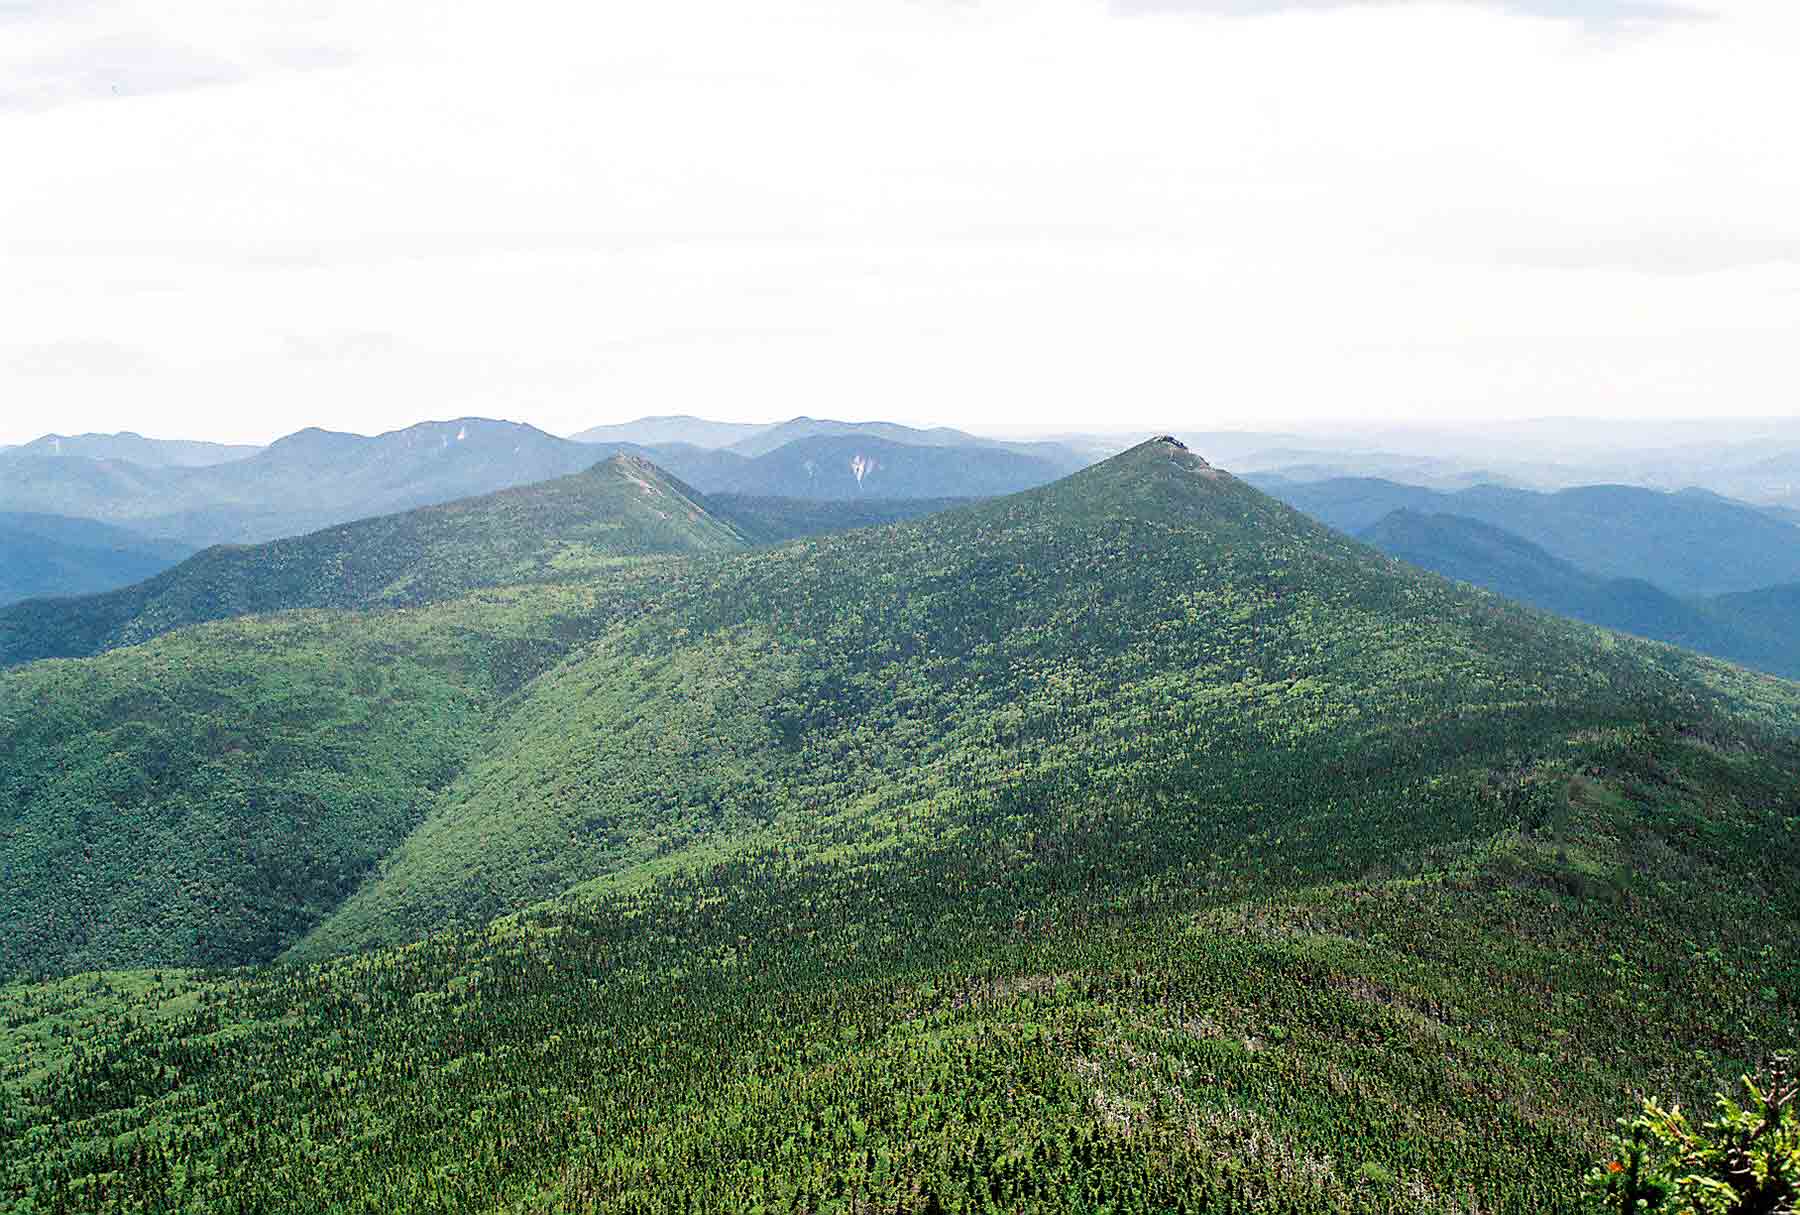 mm 23.0 - South from Little Haystack. The southbound AT drops below tree line and follows the ridge to just north of Mt. Liberty (closer of the two conical mountains) then descends into Franconia notch on the right. The other conical mountain is Mt. Flume.  Courtesy dlcul@conncoll.edu